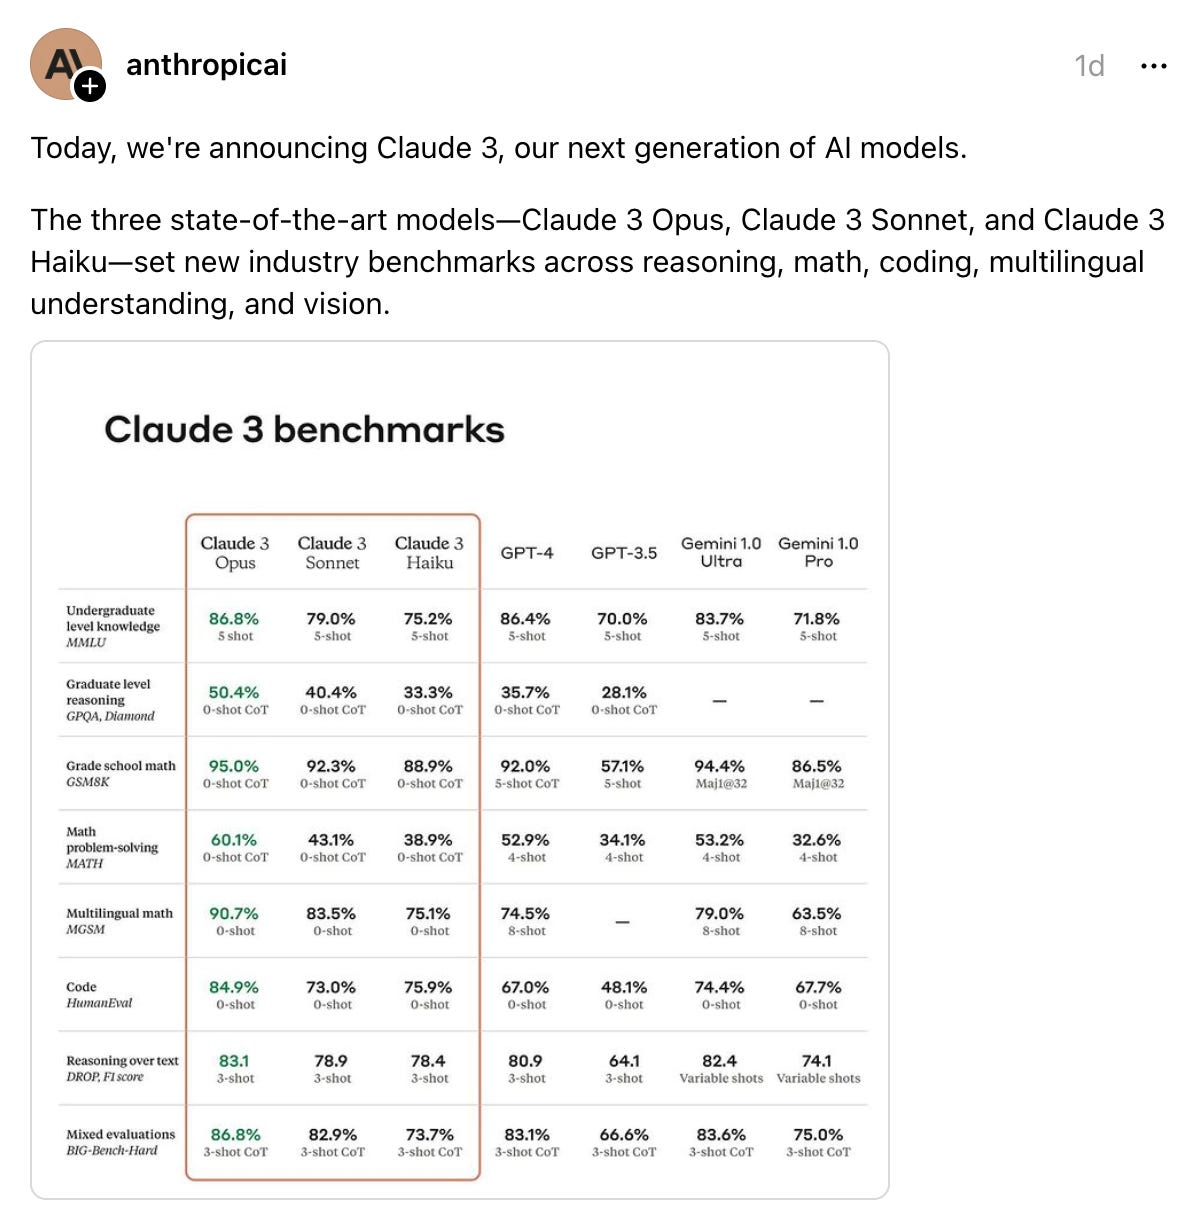  anthropicai 1d Today, we're announcing Claude 3, our next generation of AI models. The three state-of-the-art models—Claude 3 Opus, Claude 3 Sonnet, and Claude 3 Haiku—set new industry benchmarks across reasoning, math, coding, multilingual understanding, and vision.